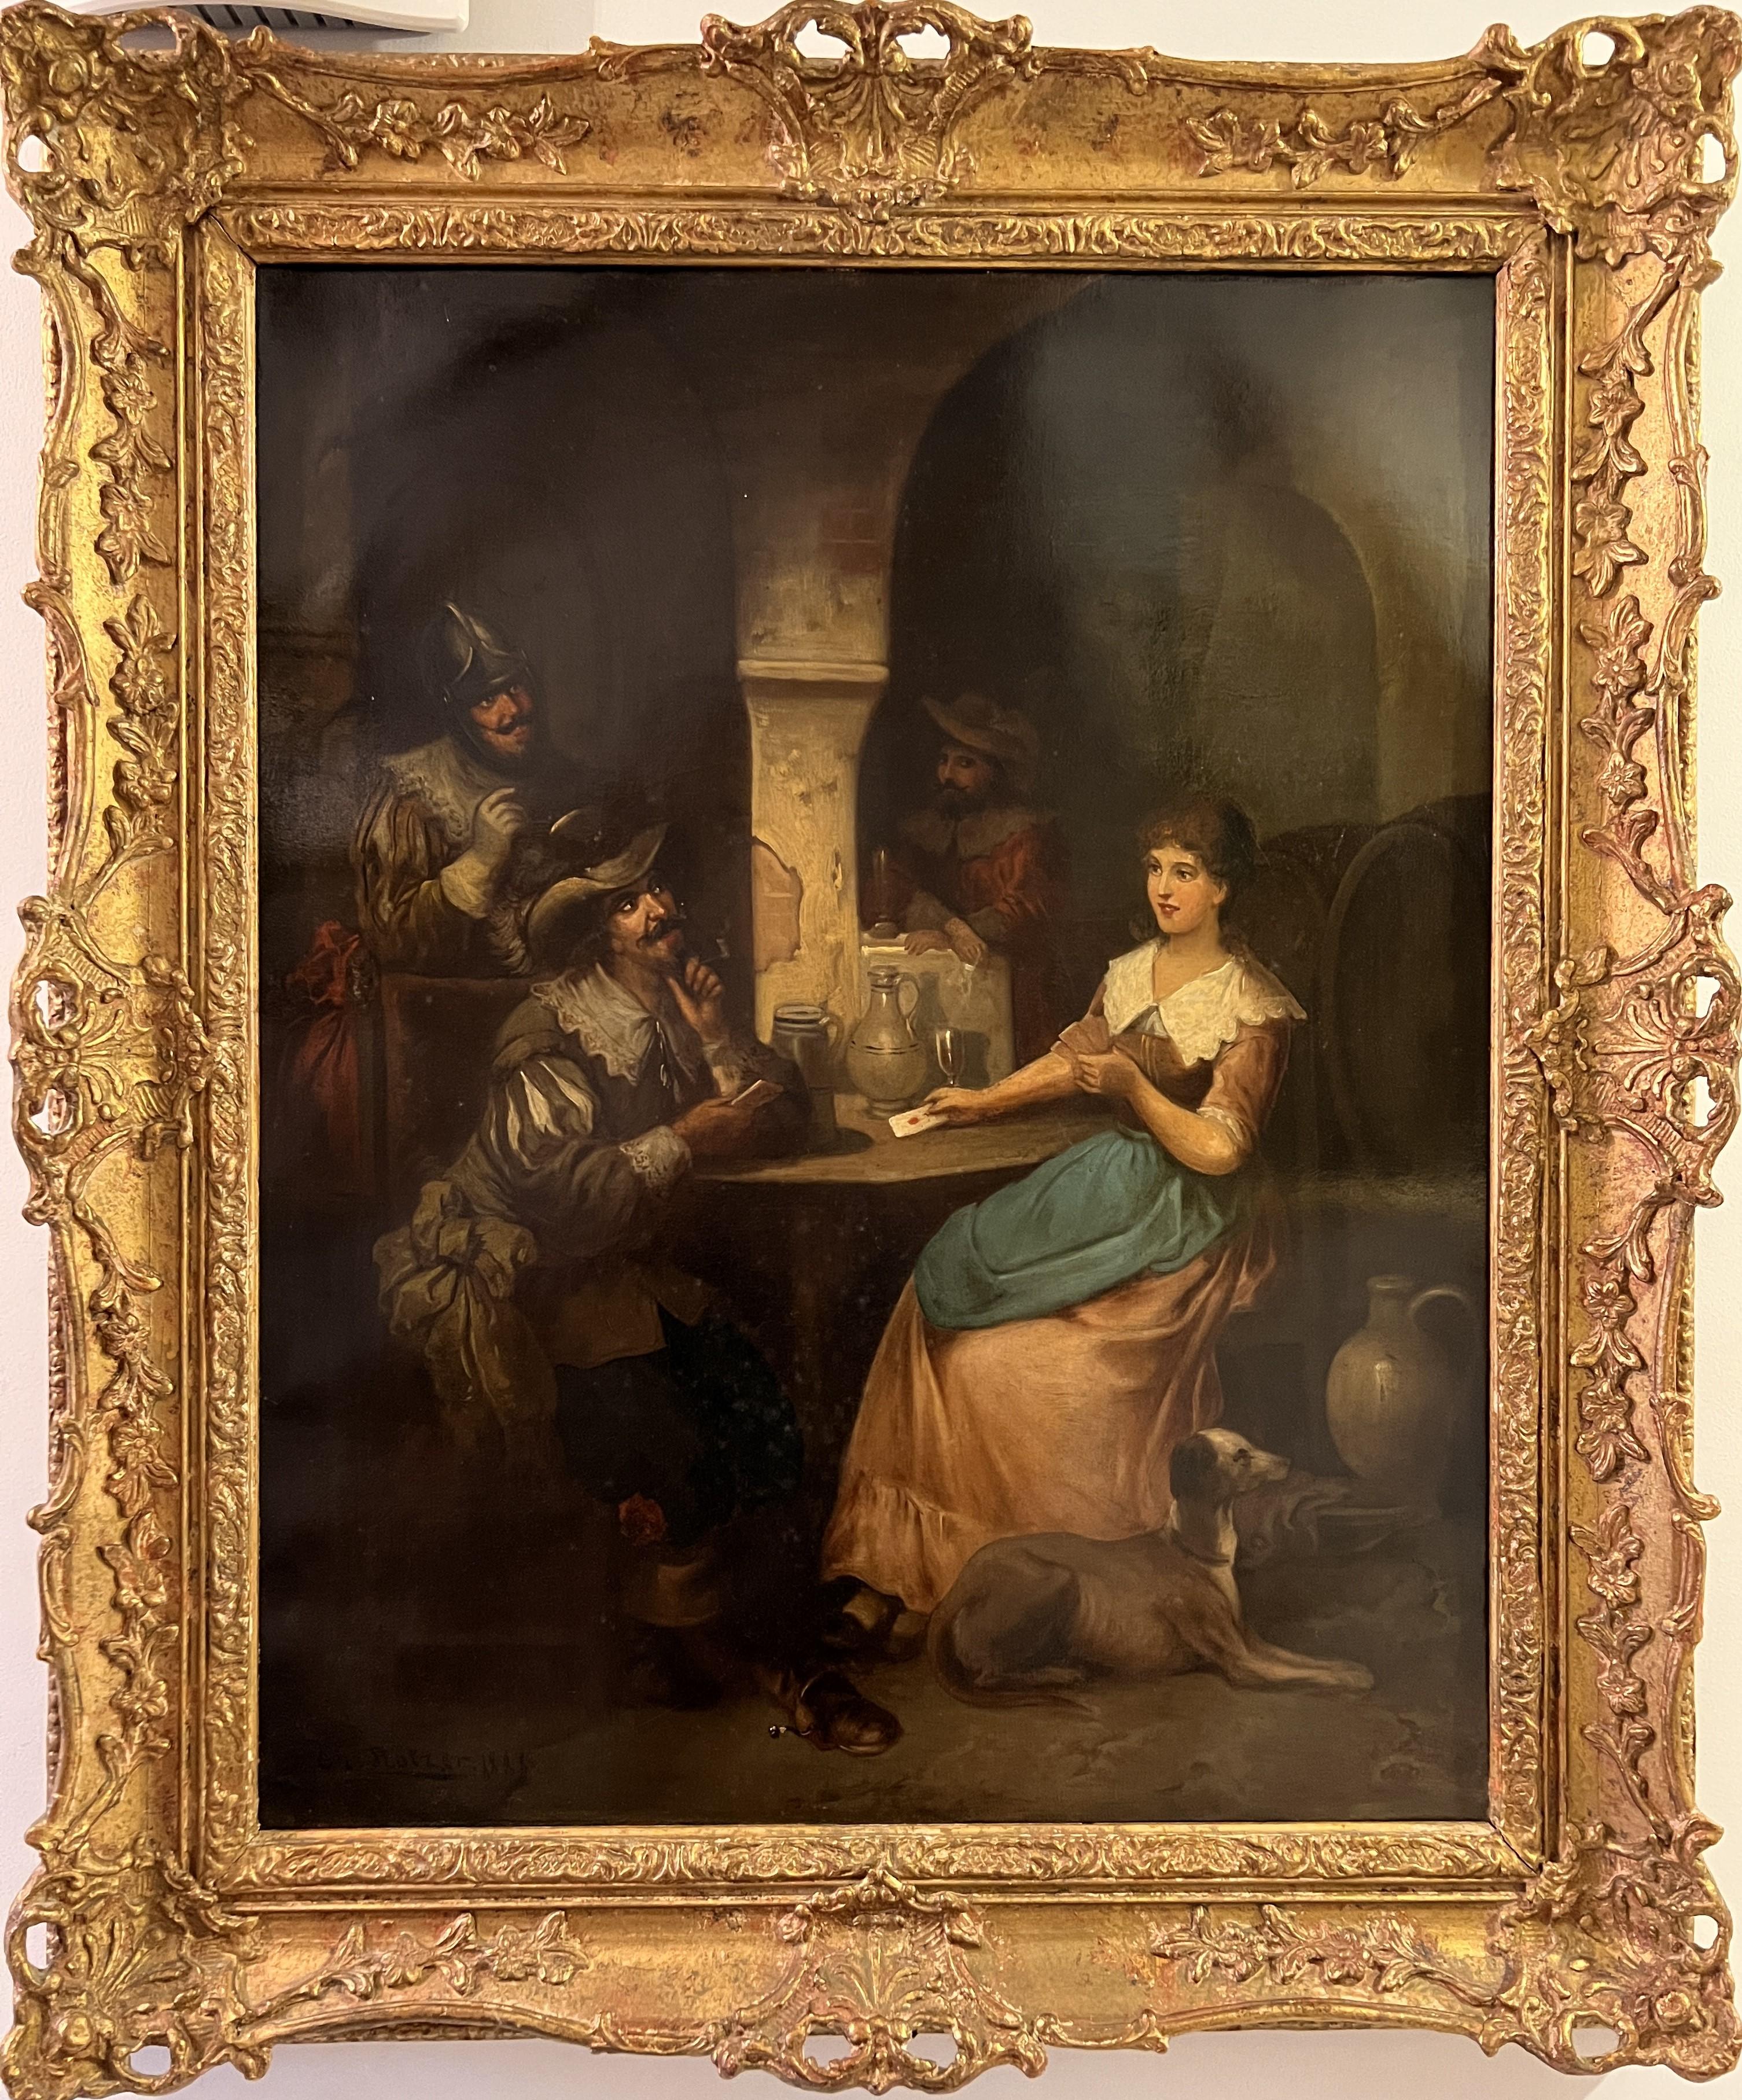 Up for sale is an interesting antique 19th-century original oil painting on canvas depicting an interior scene with a knight and a cavalier competing for the attention of a young lady. CONTINENTAL SCHOOL.

Signed and dated in the lower-left corner